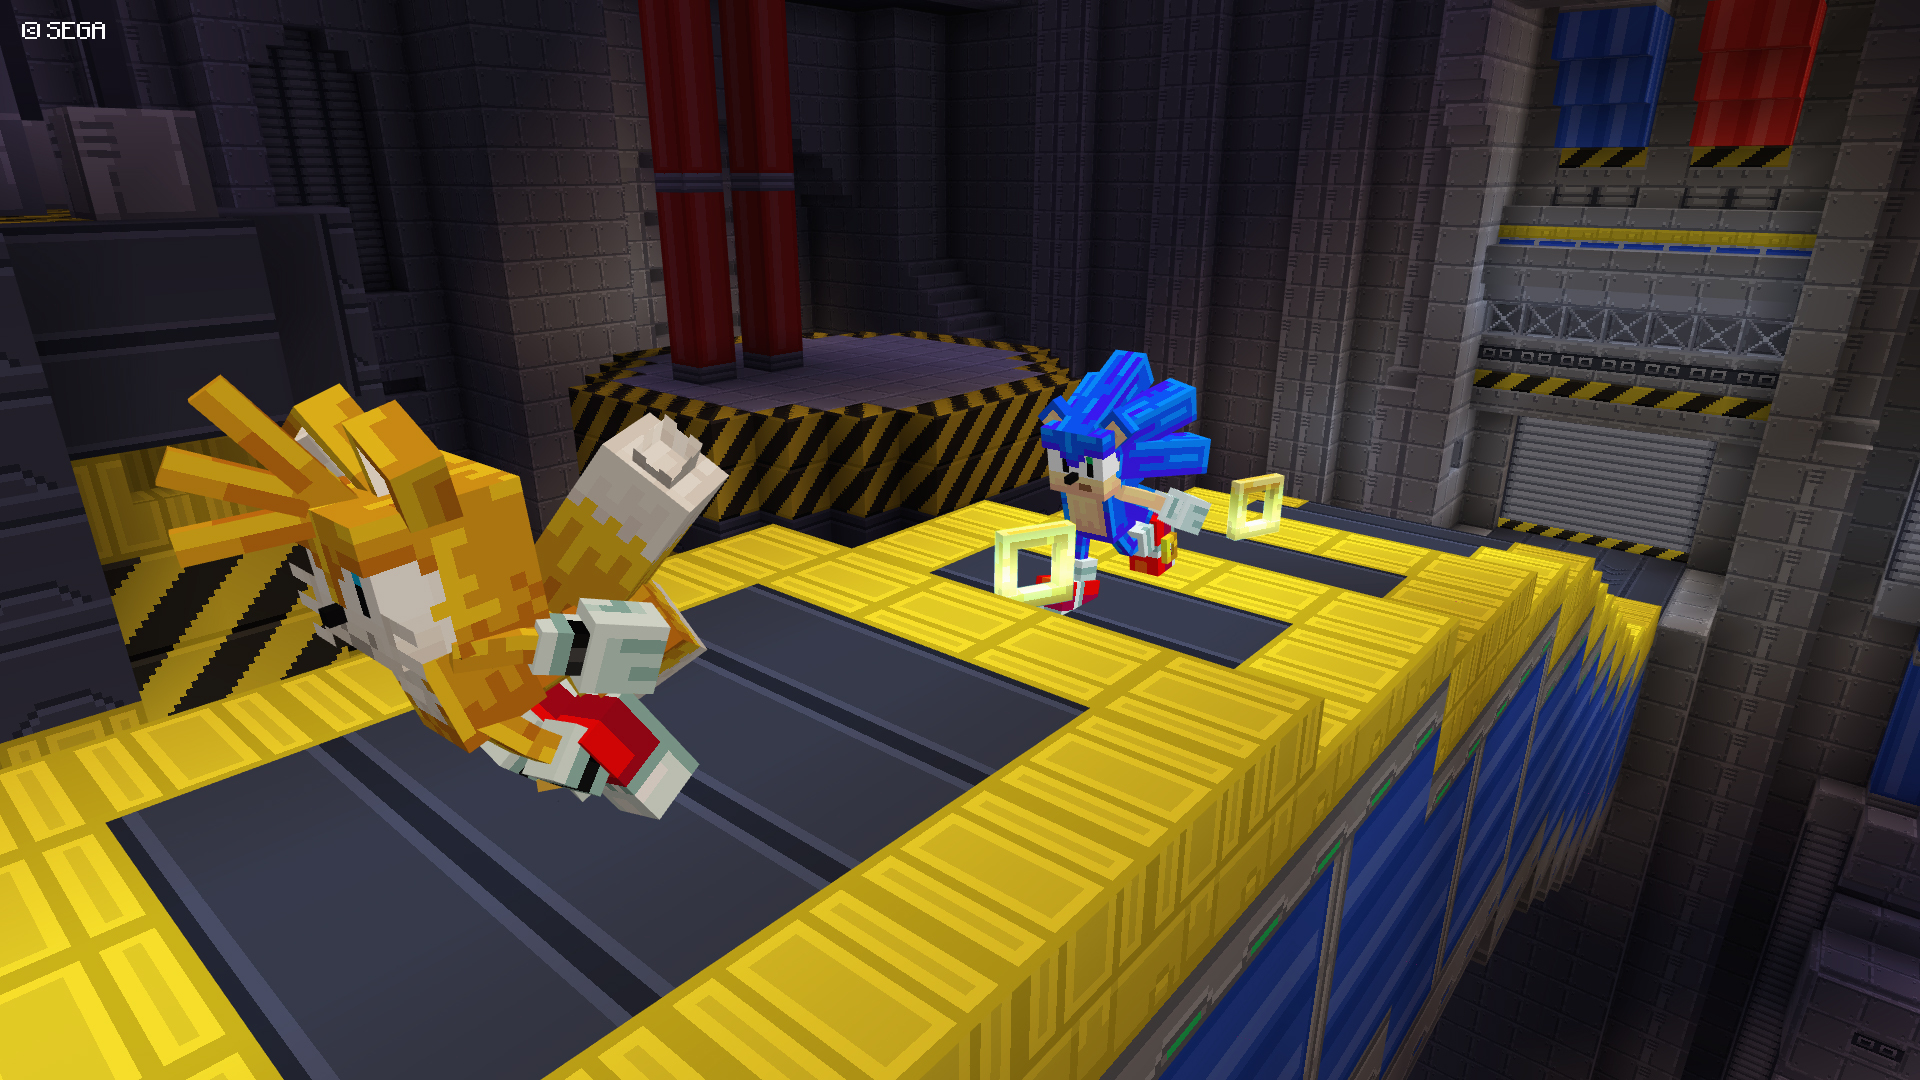 Sonic the Hedgehog in Minecraft Marketplace